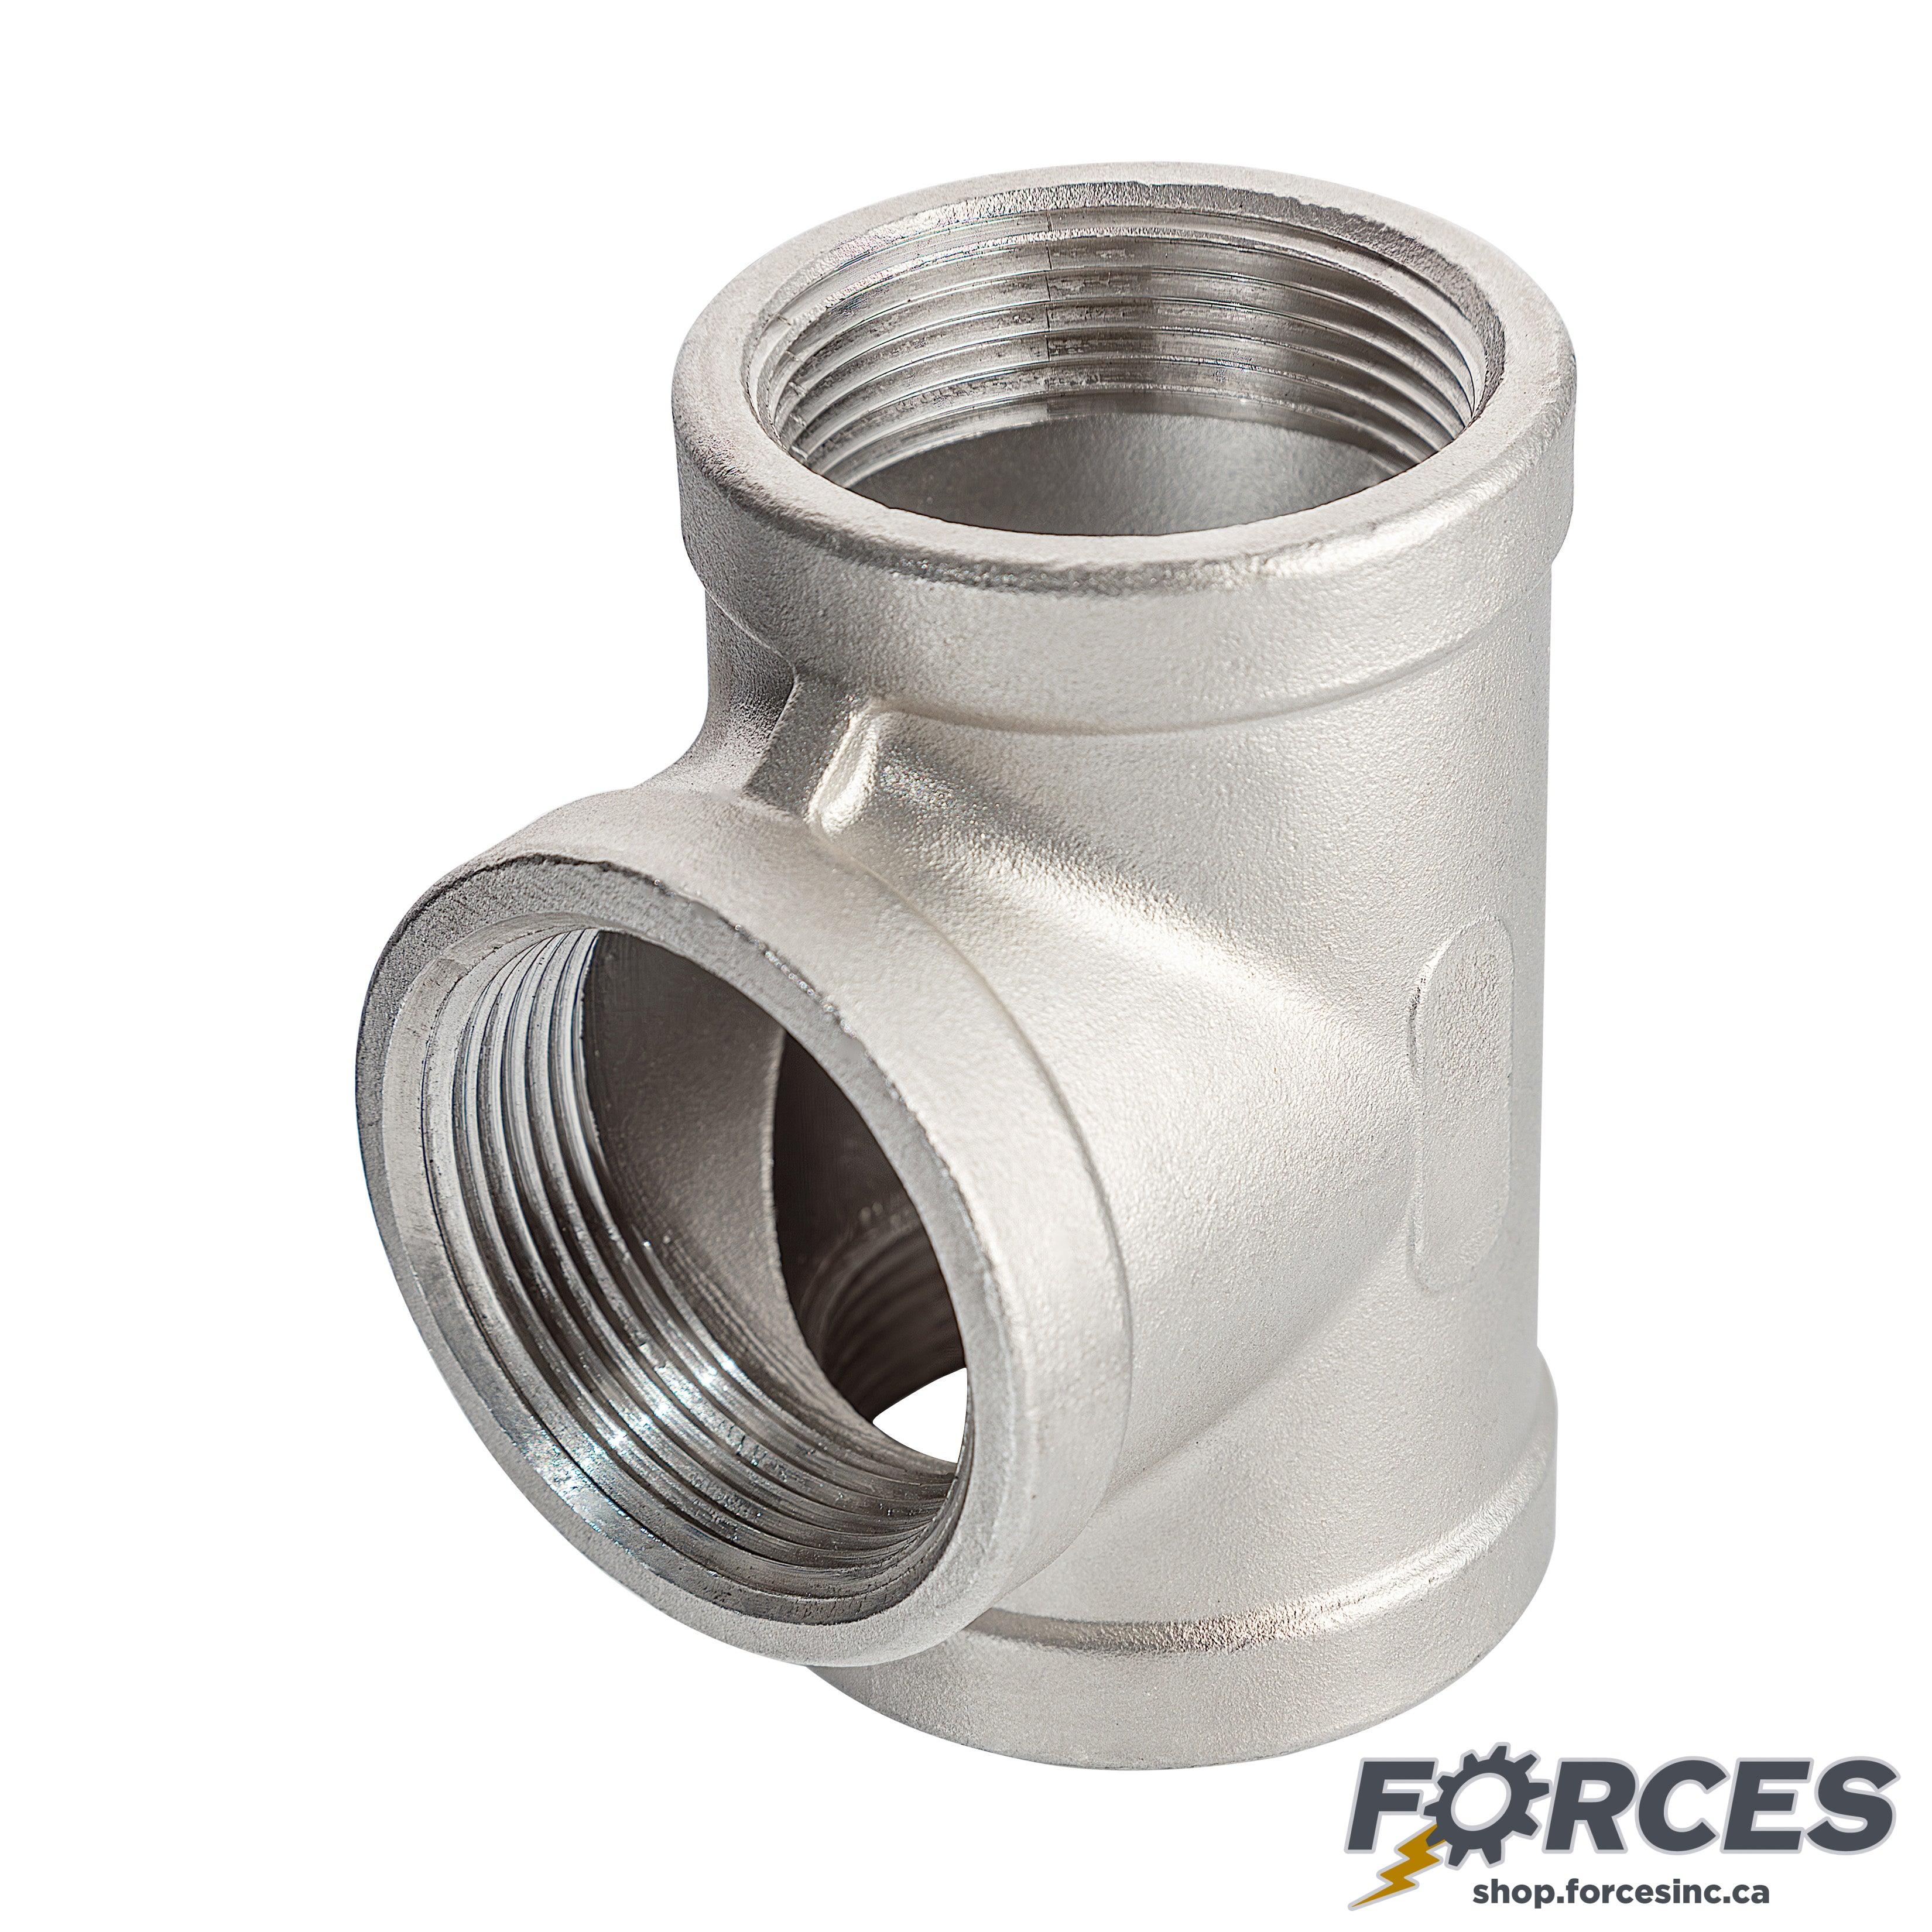 1-1/4" Tee NPT #150 - Stainless Steel 316 - Forces Inc